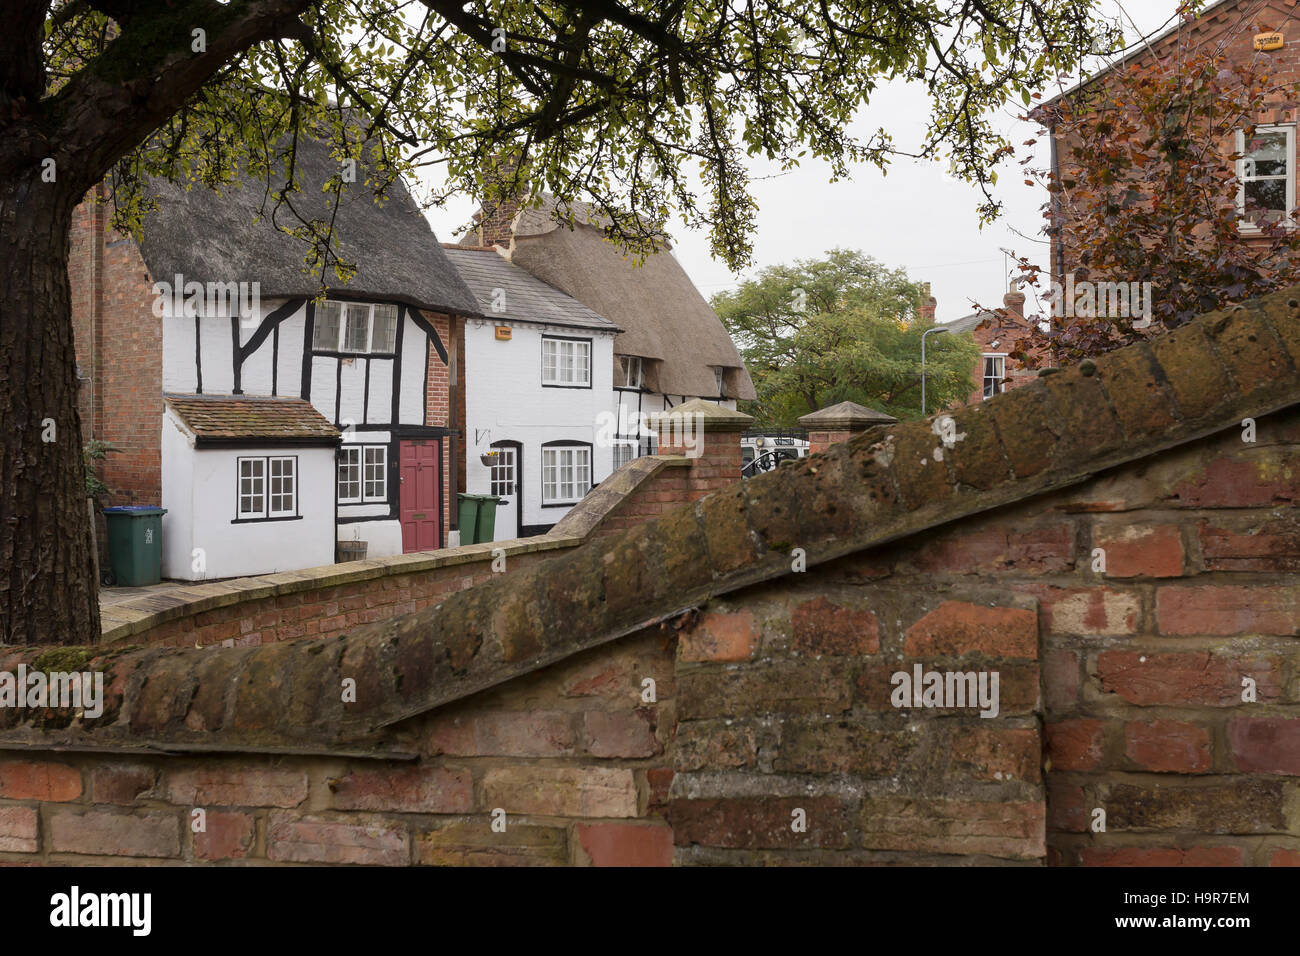 Winslow, Buckinghamshire, United Kingdom, October 25, 2016: View on Cottages on Horn street from Church street, Winslow. Stock Photo